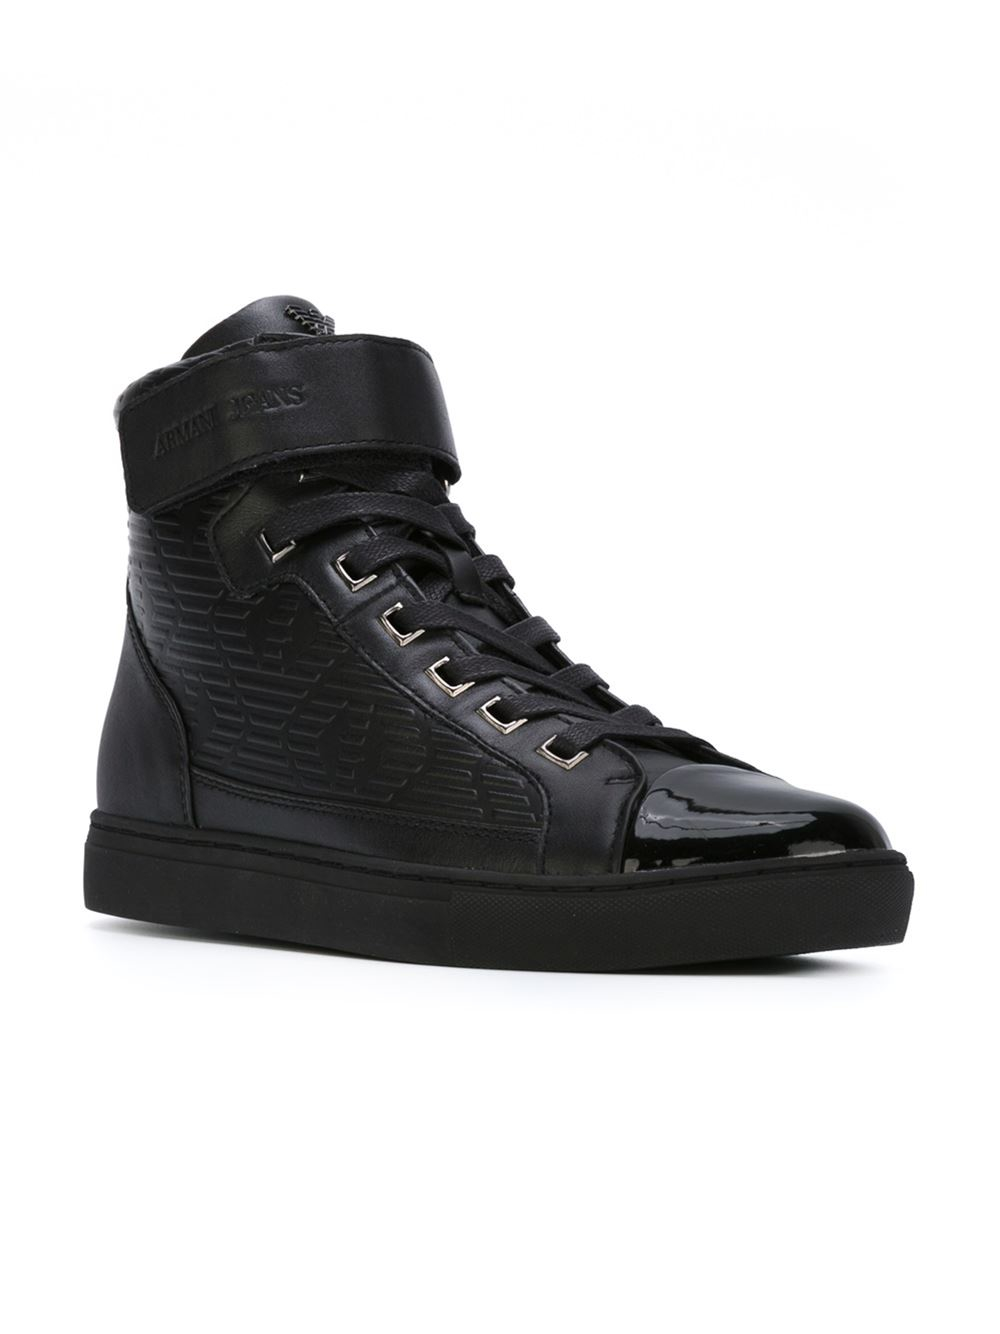 Lyst - Armani Jeans Leather High-Top Sneakers in Black for Men